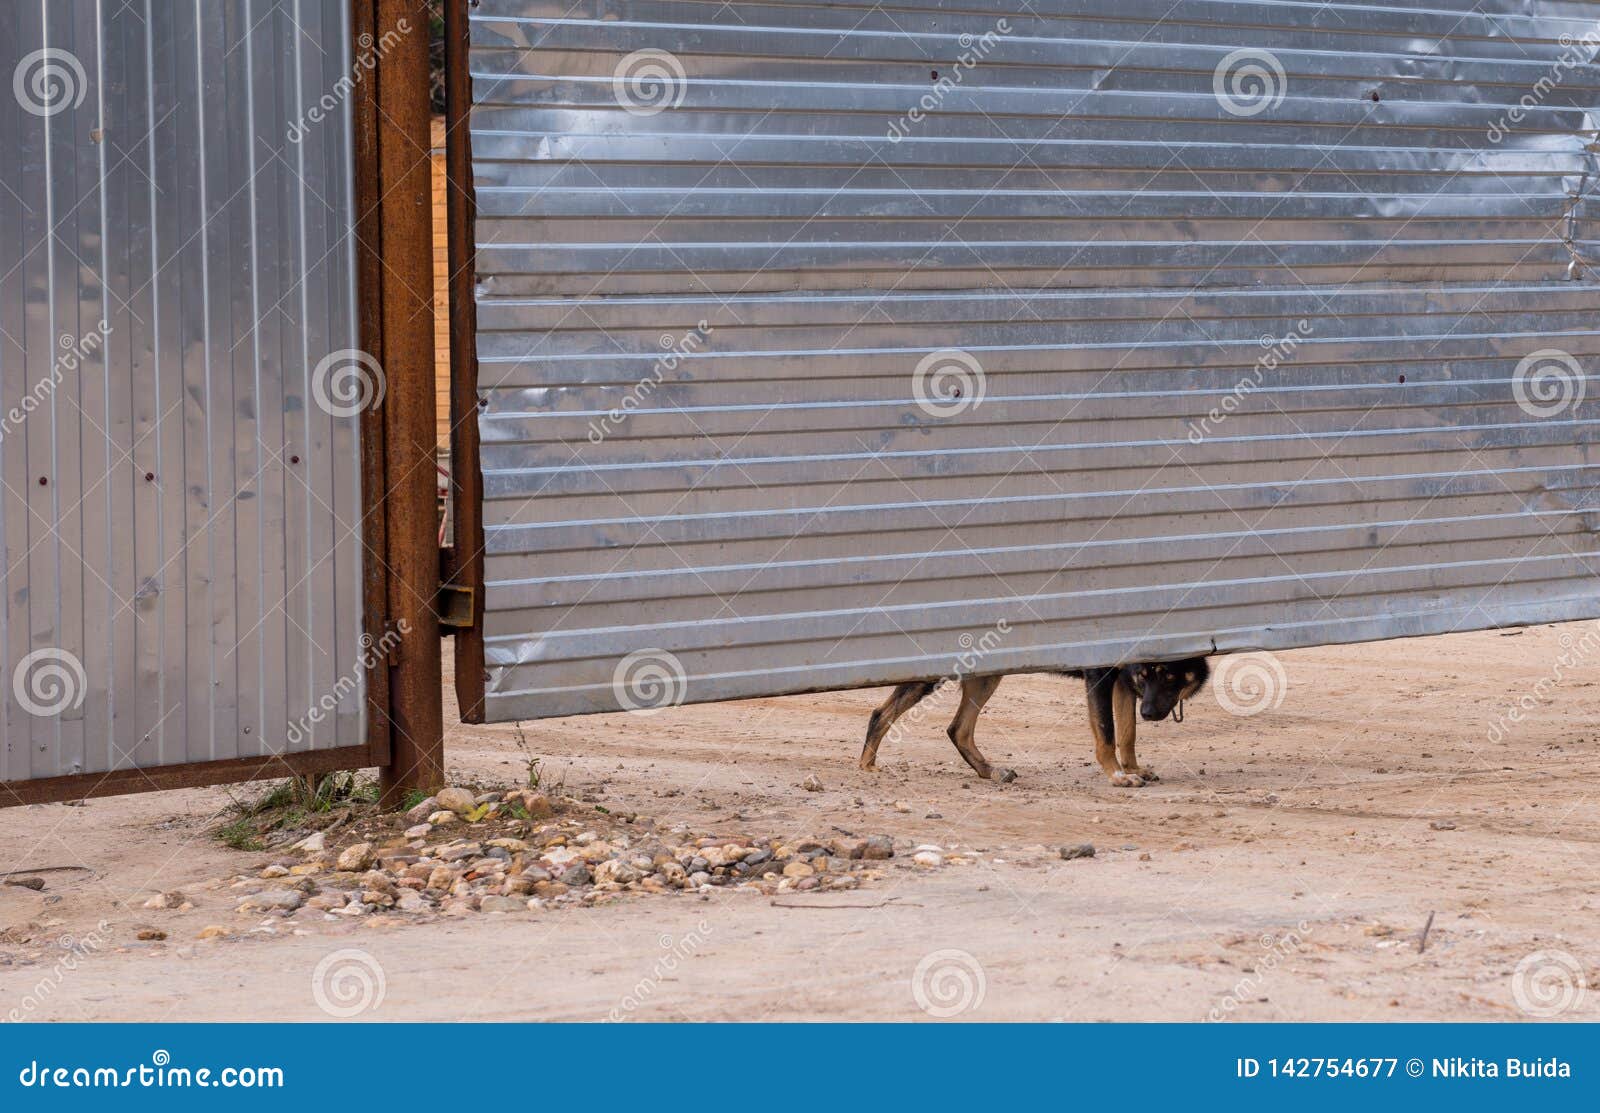 Guard Dog Looking Out From Under The Fence Stock Image Image Of Adorable Culture